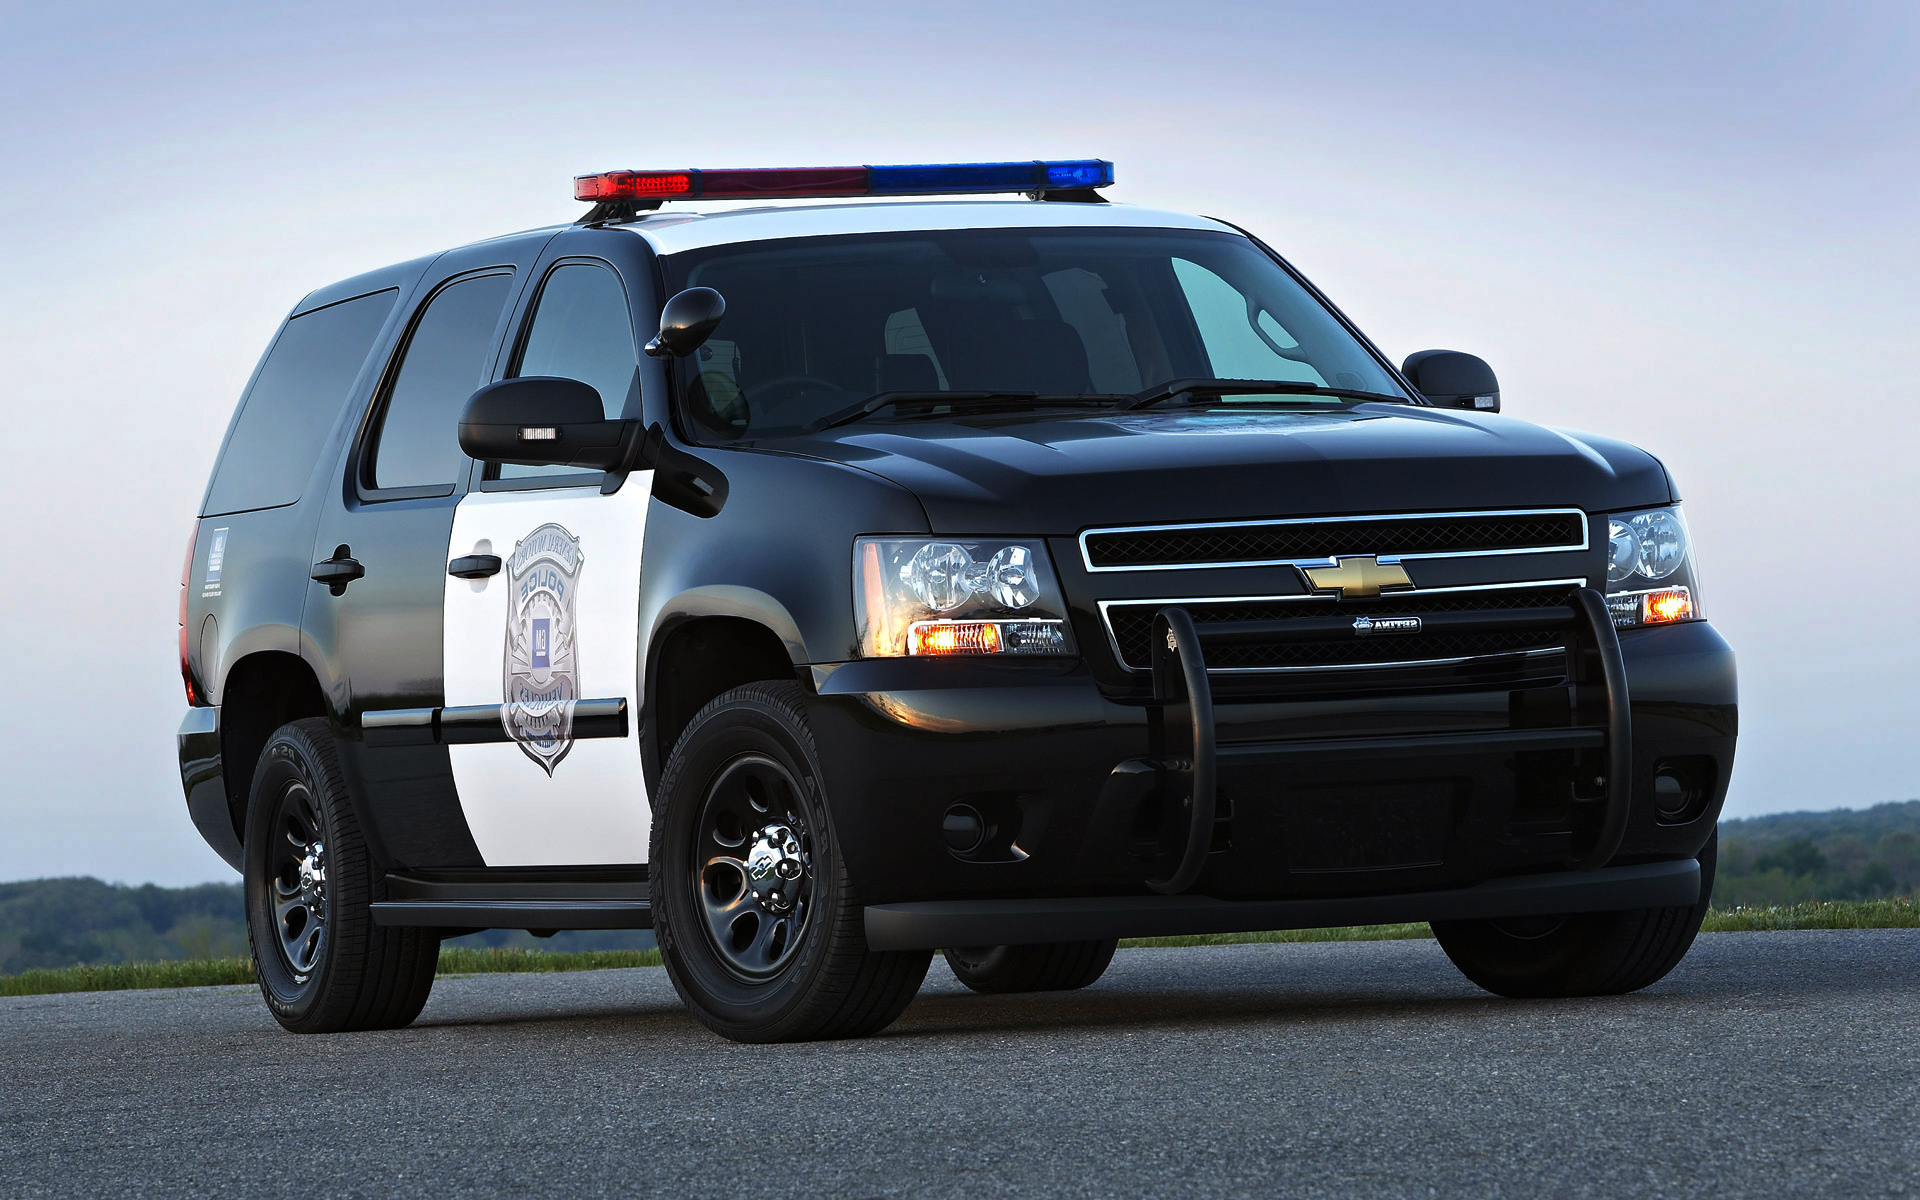 Police Car Hd The Best Of Web S And More P Ography Blog 1038327 Wallpaper wallpaper download